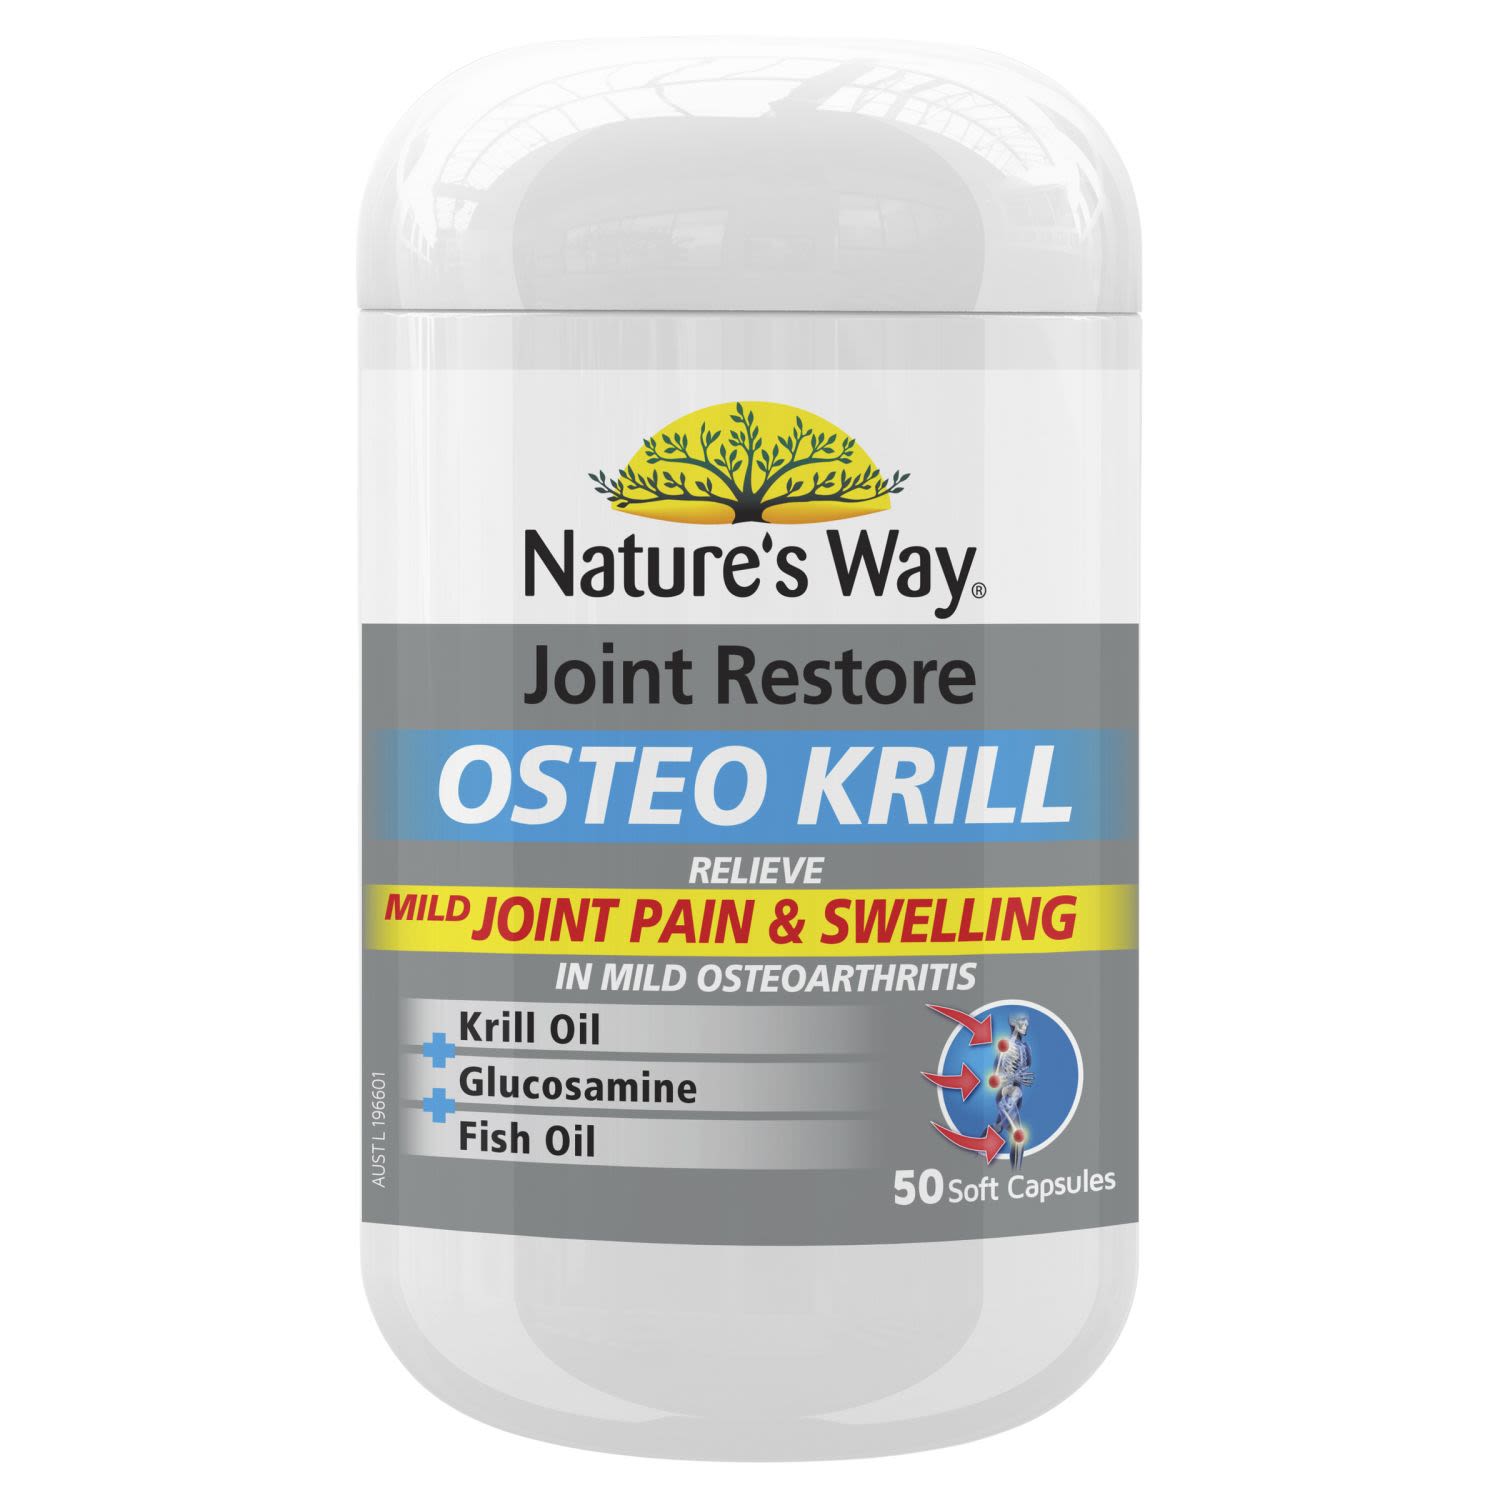 Nature's Way Joint Restore Osteo Krill, 50 Each